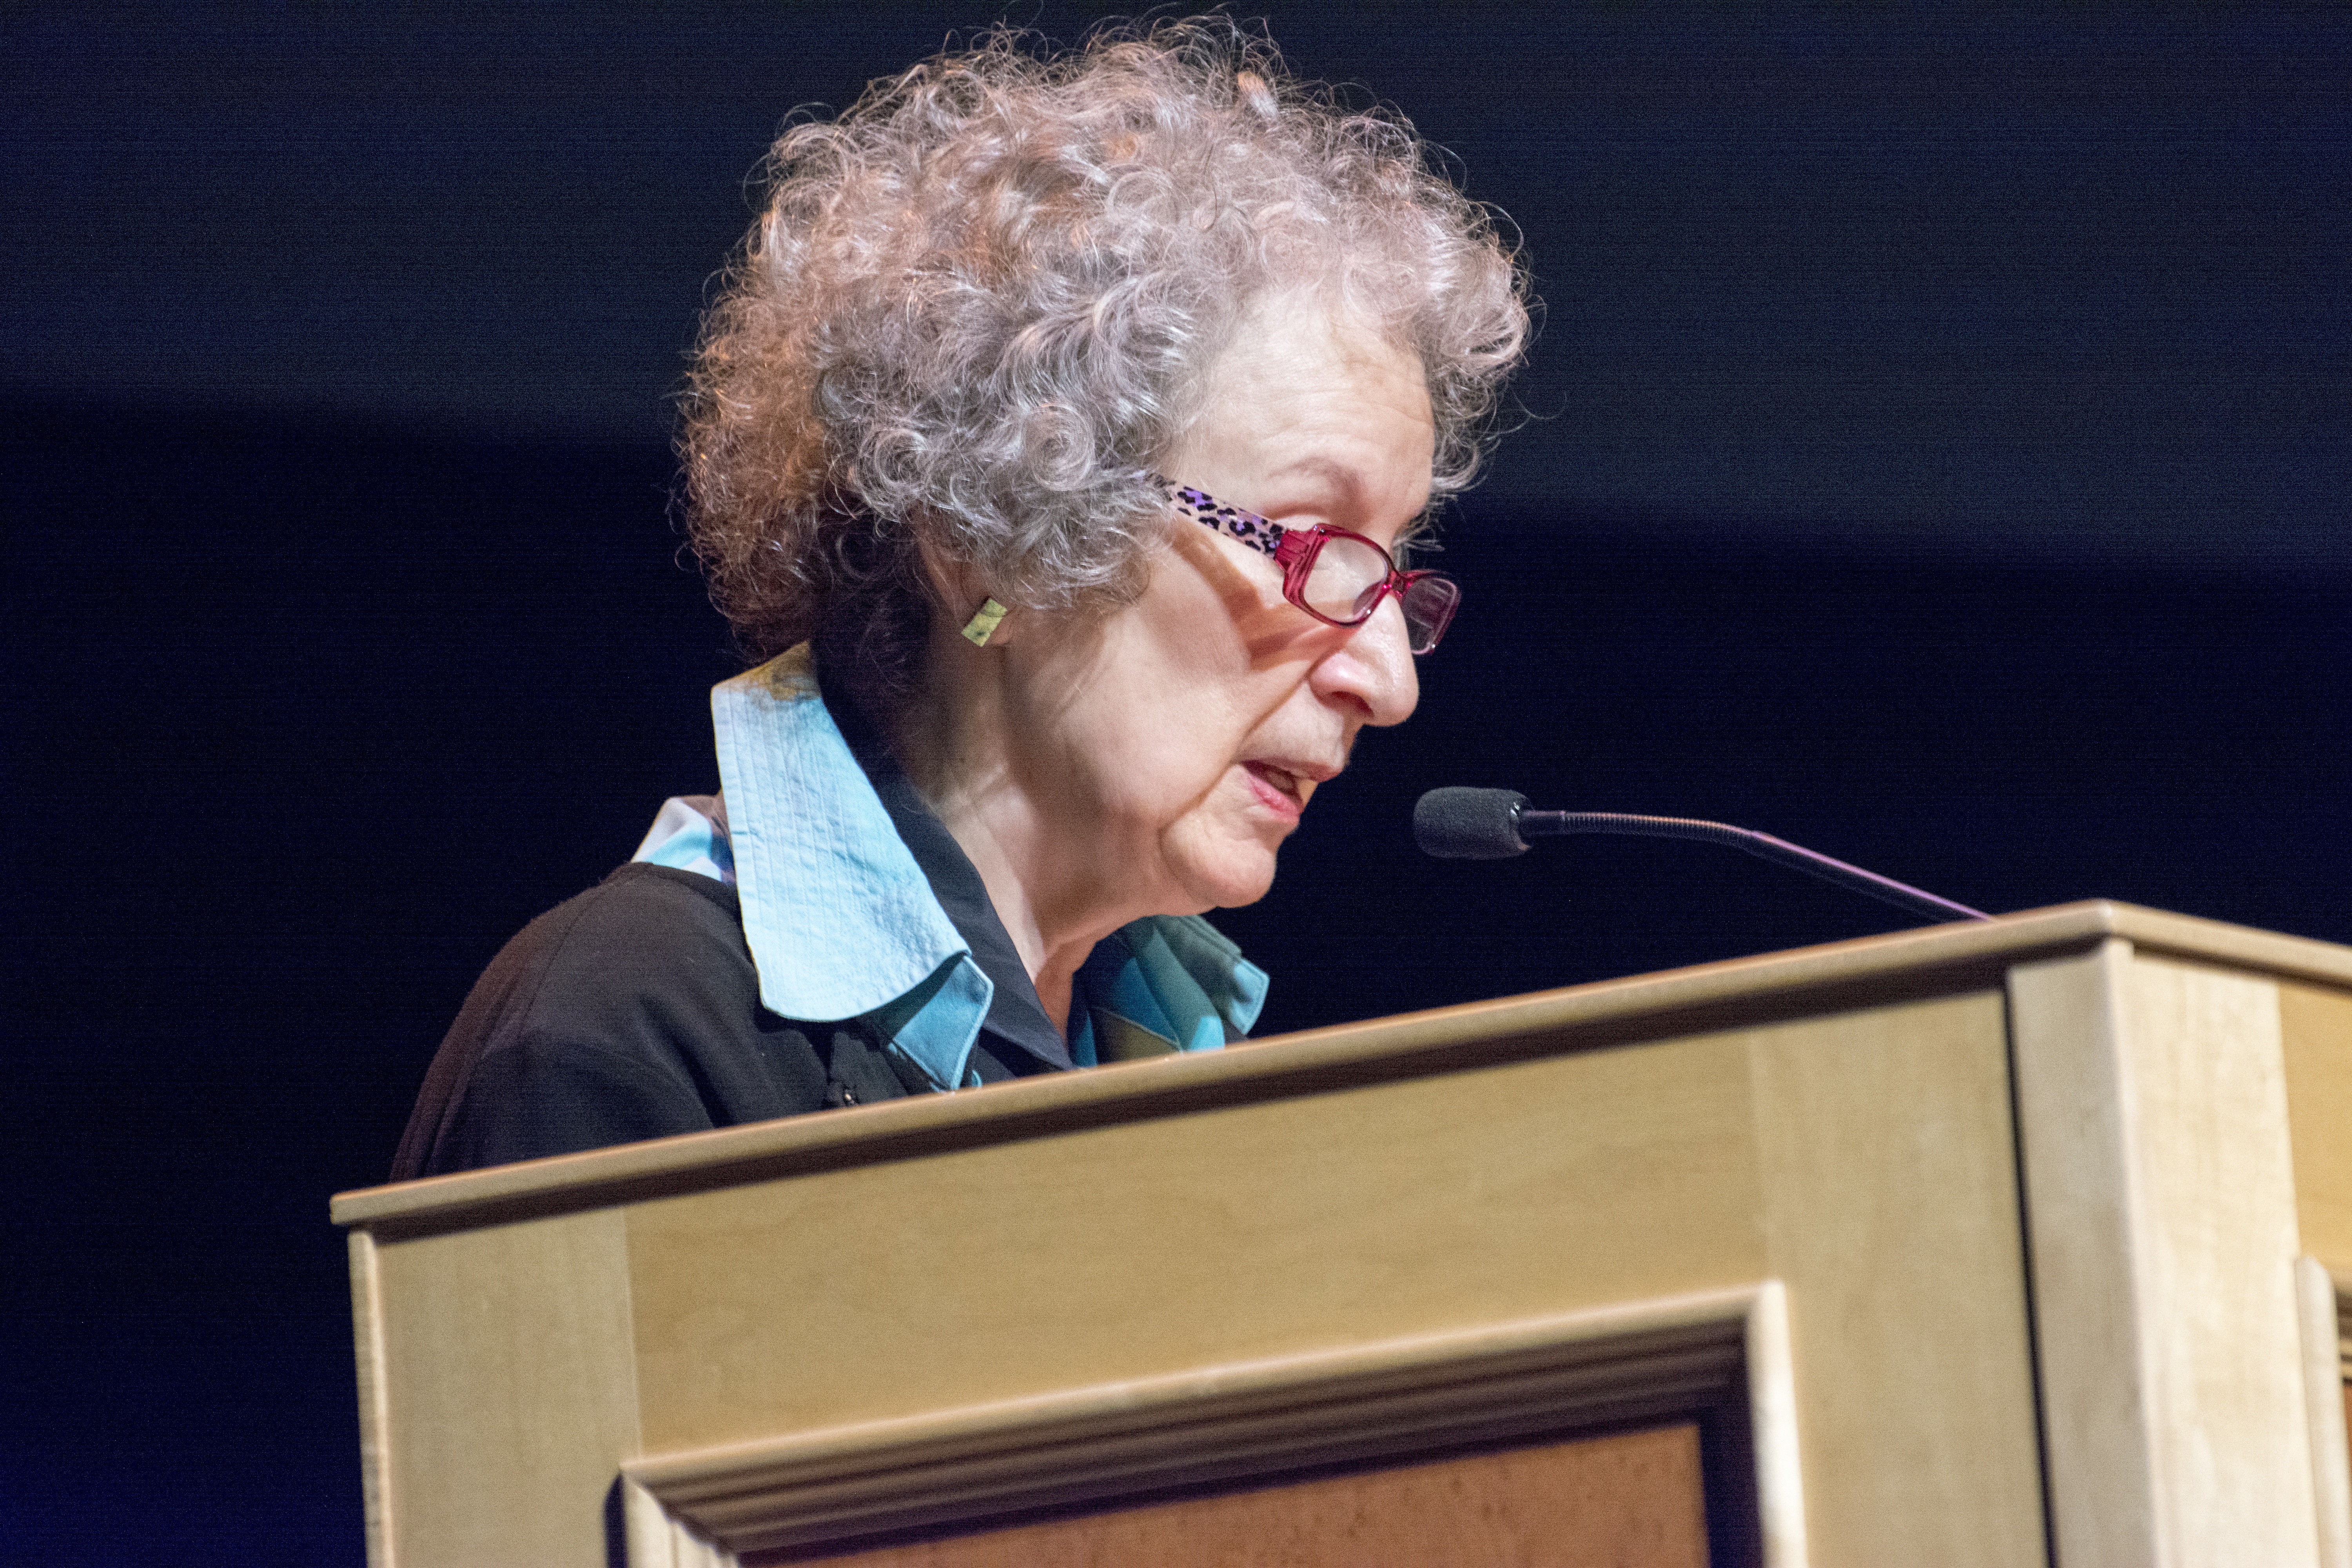 INFLUENTIAL – Margaret Atwood addressed an audience at the Red Deer College Arts Centre Monday night as part of the Perspective Series.